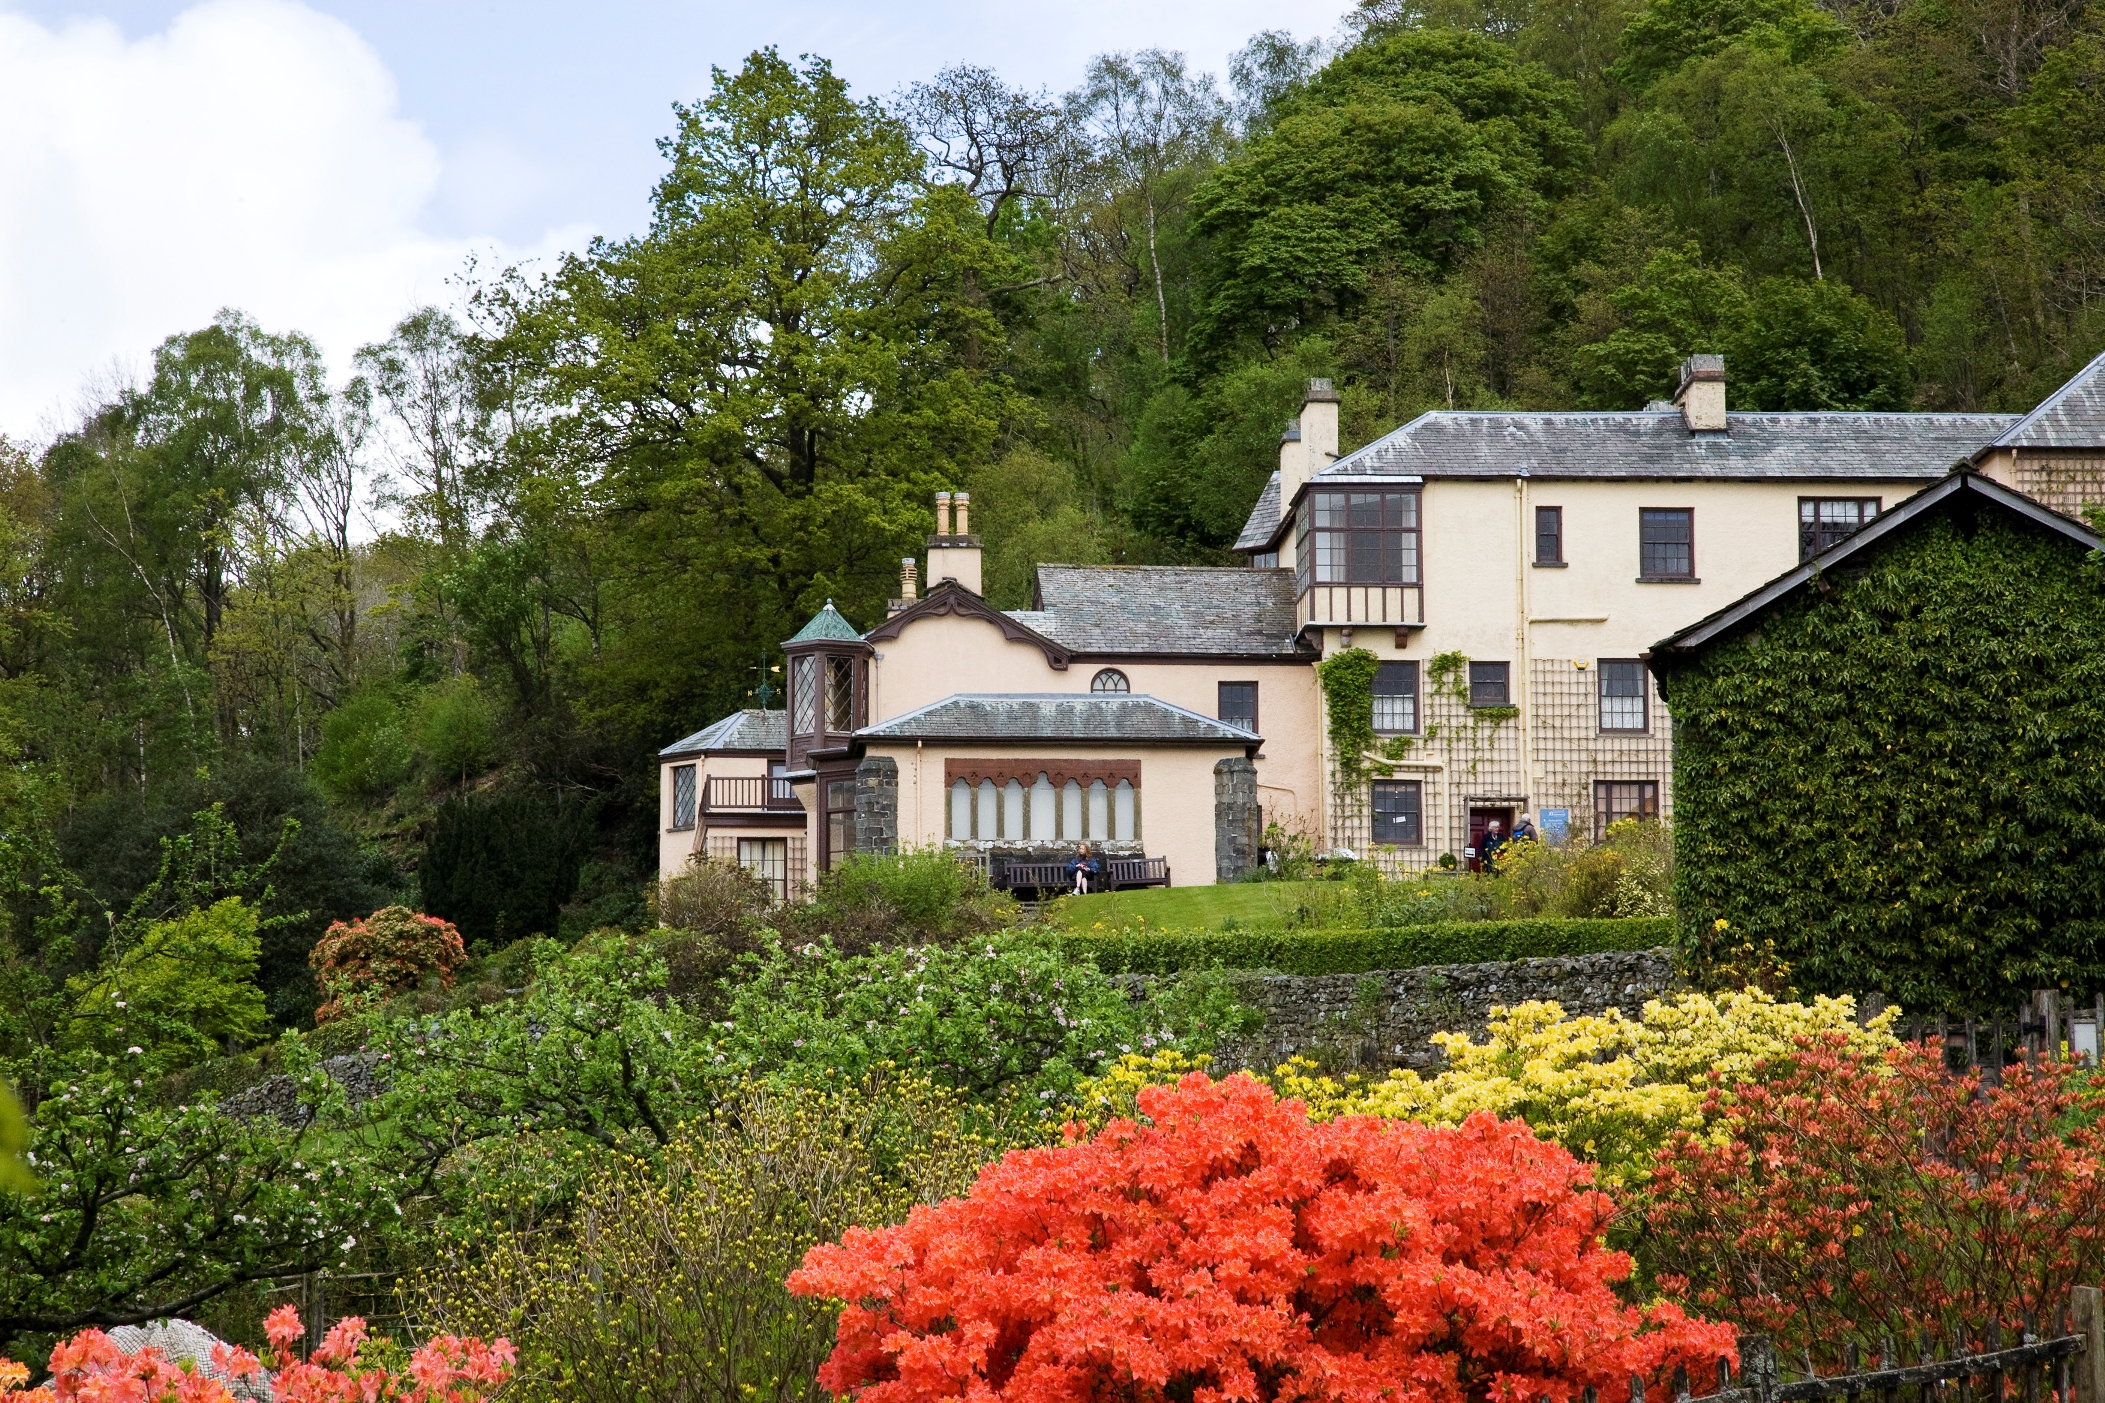 Cumbria - Azalea and Rhododendron Pruning Day